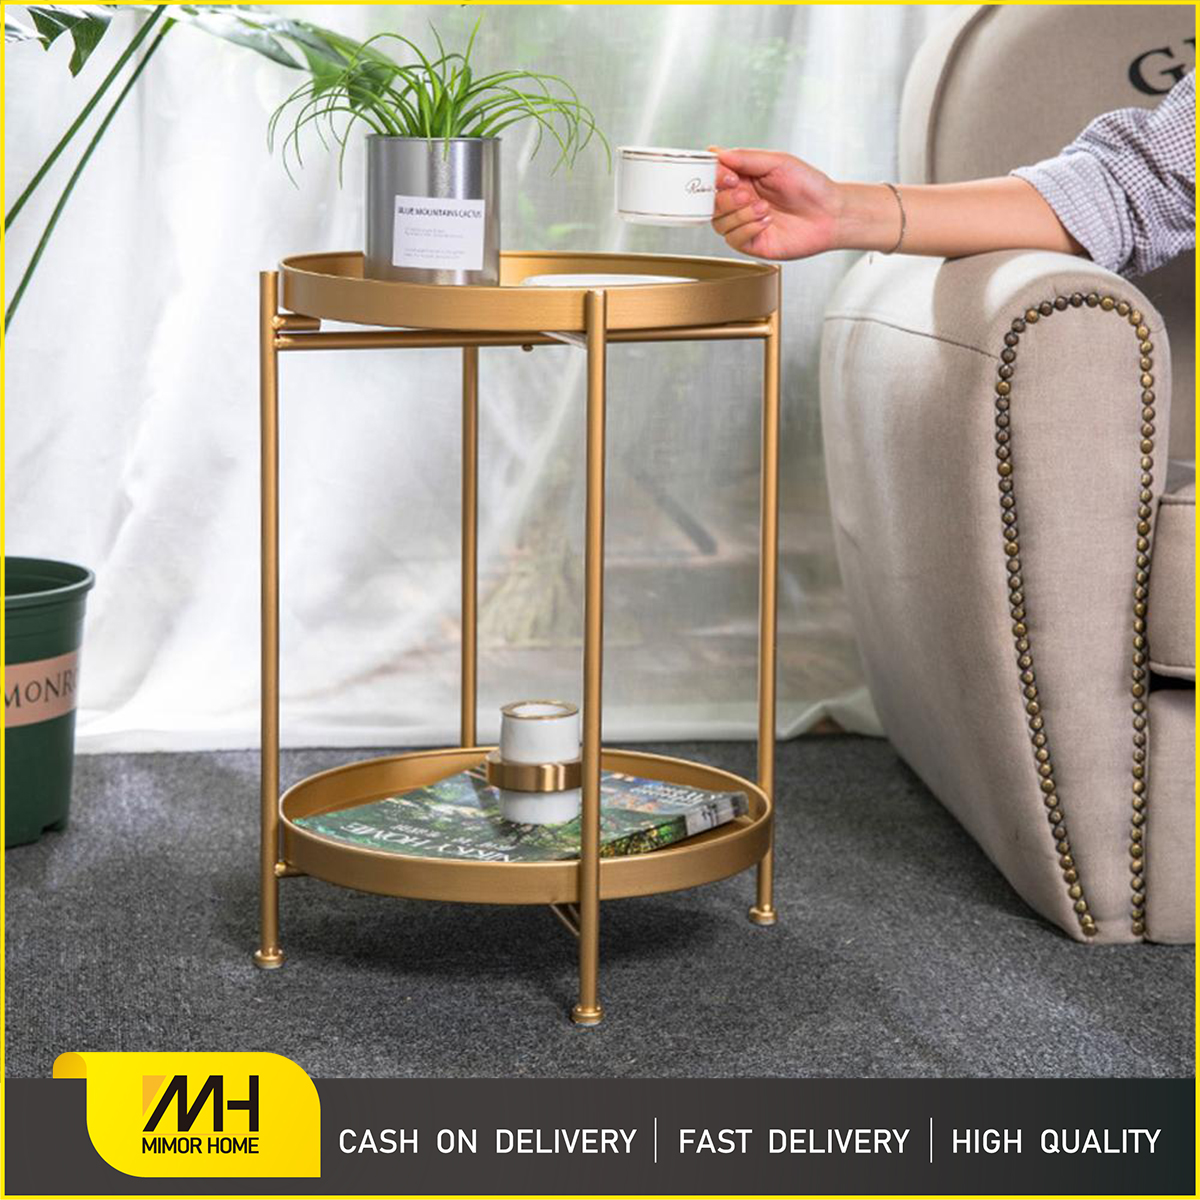 Nordic Style Simple Metal Coffee Table Side Low Table Sofa Side Small Round Center Side Table Desk,Bl